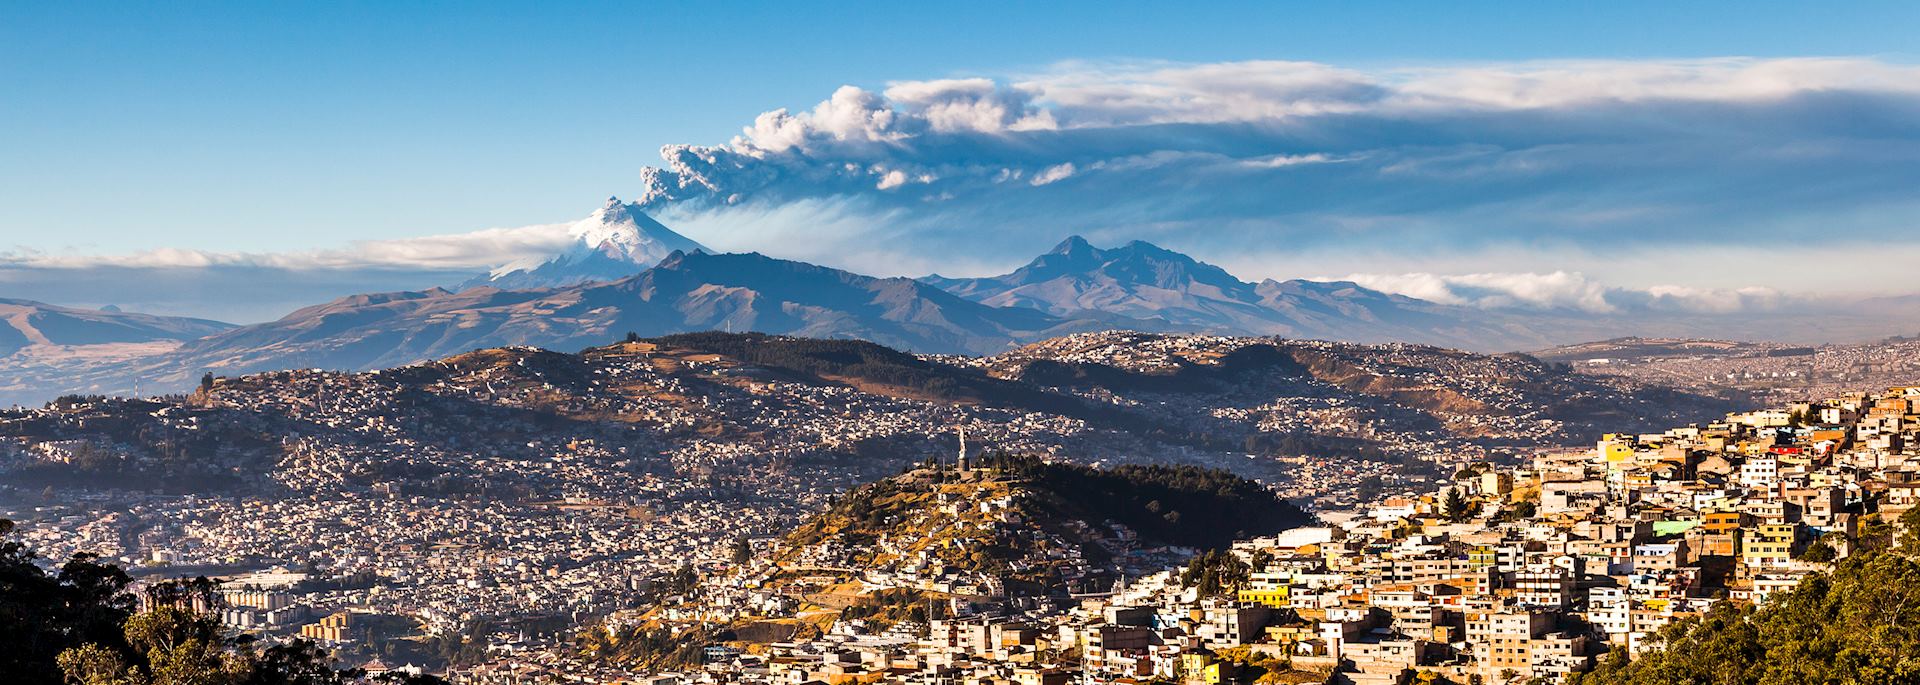 Quito with Cotopaxi Volcano in the background